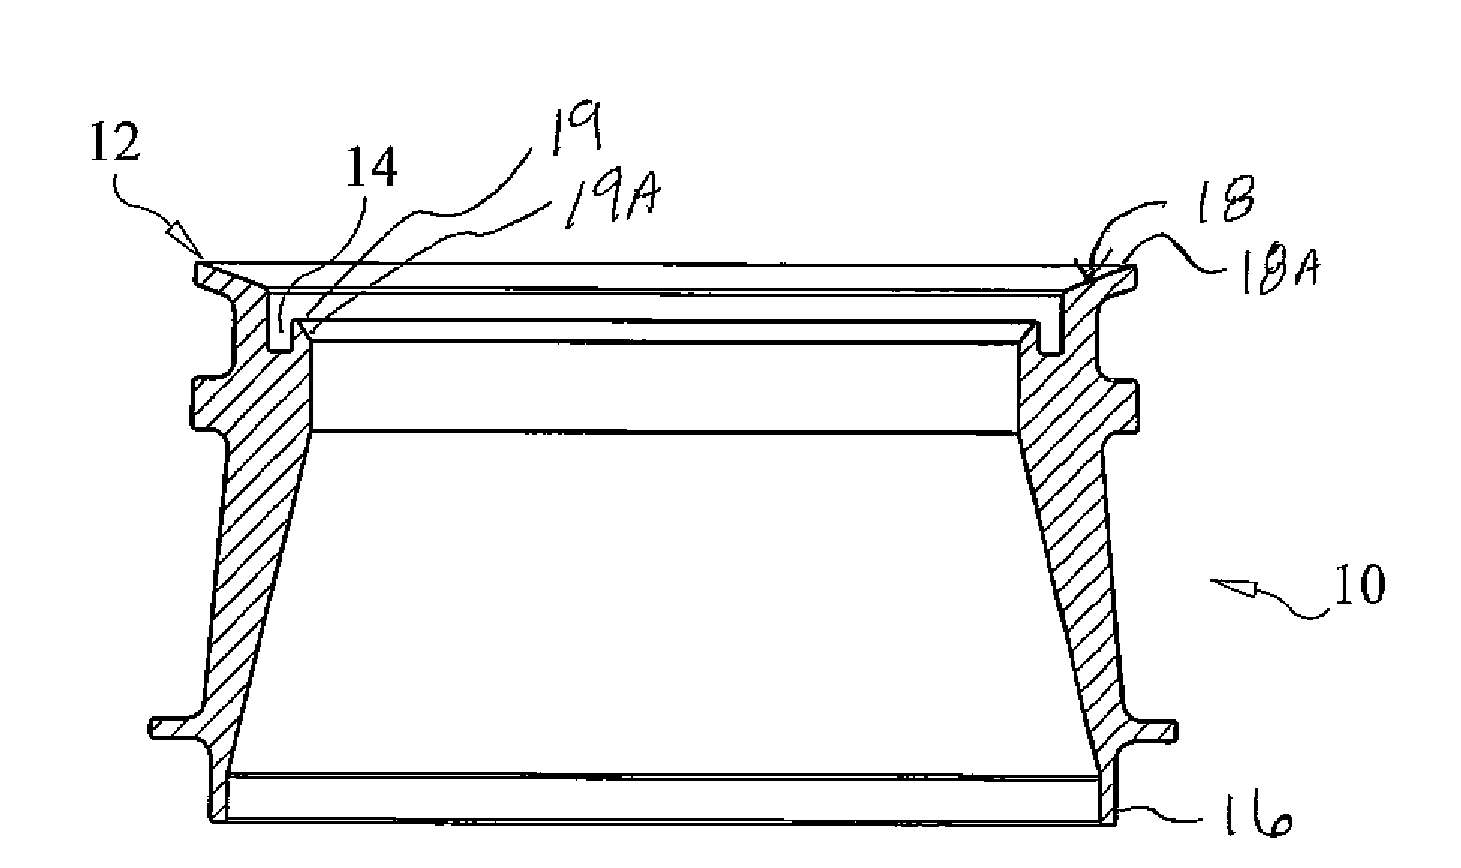 Gasketed connection of marine engine exhaust outlet to exhaust conduit